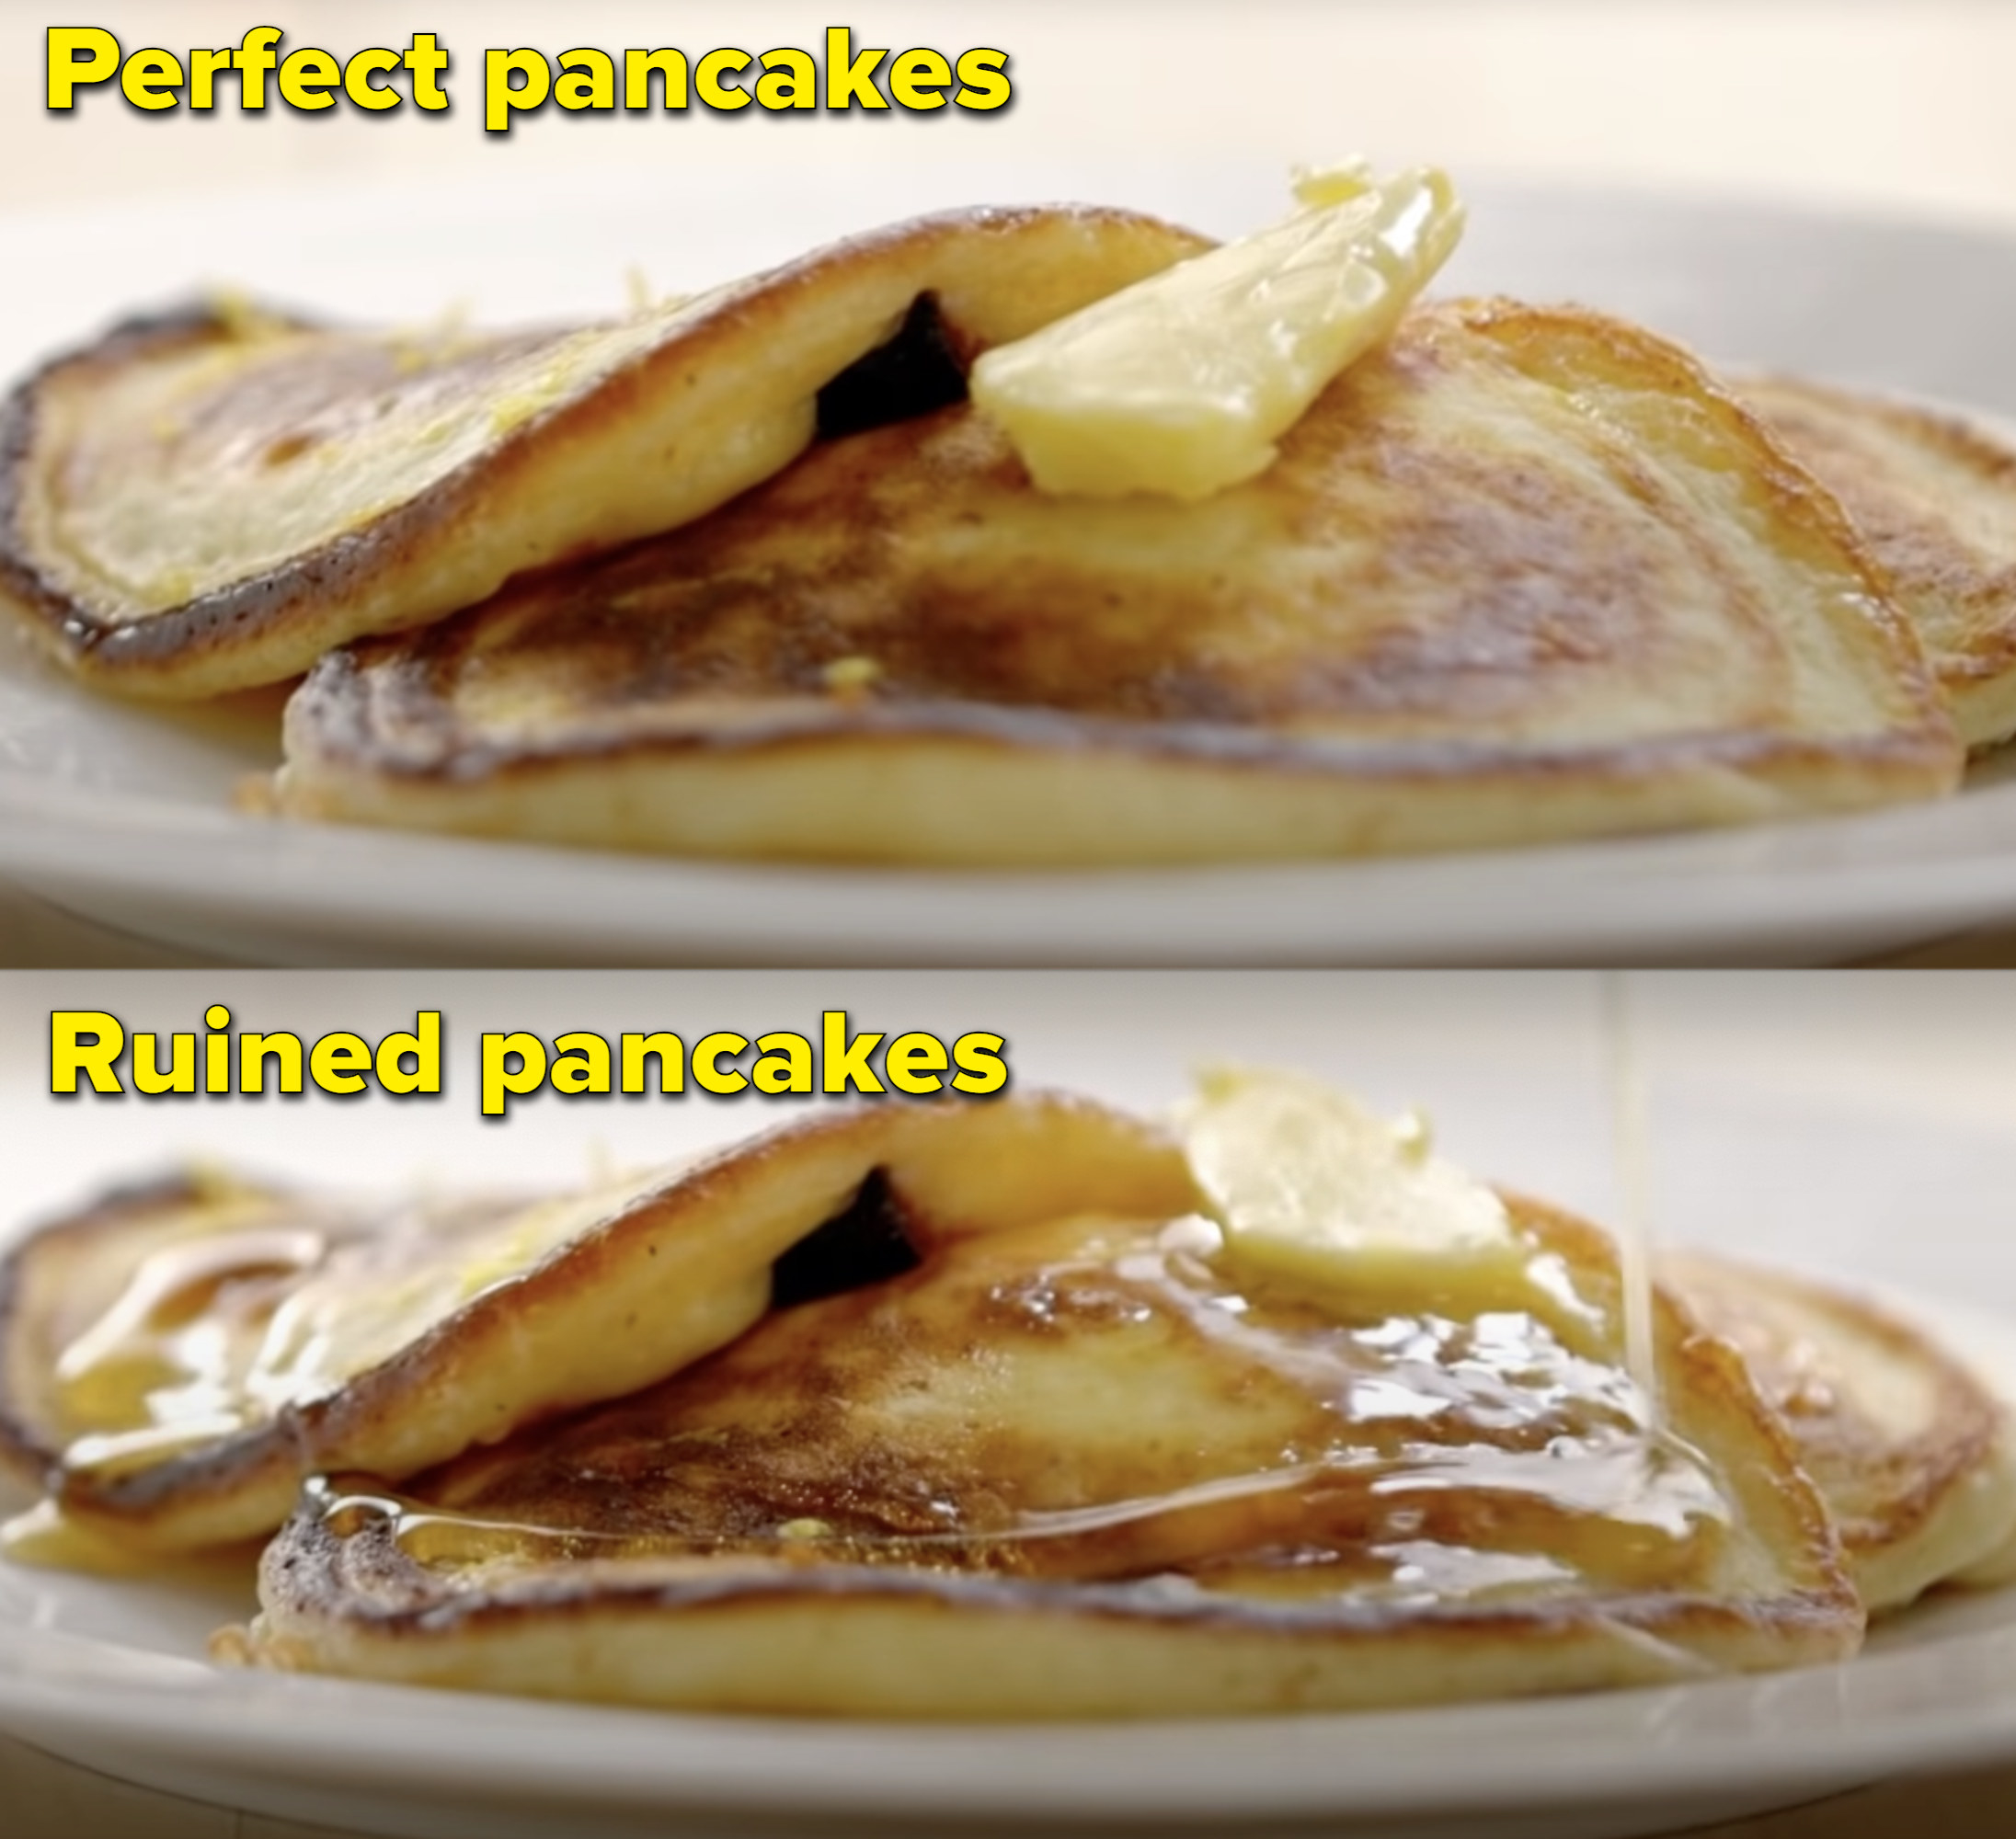 Pancakes with and without syrup